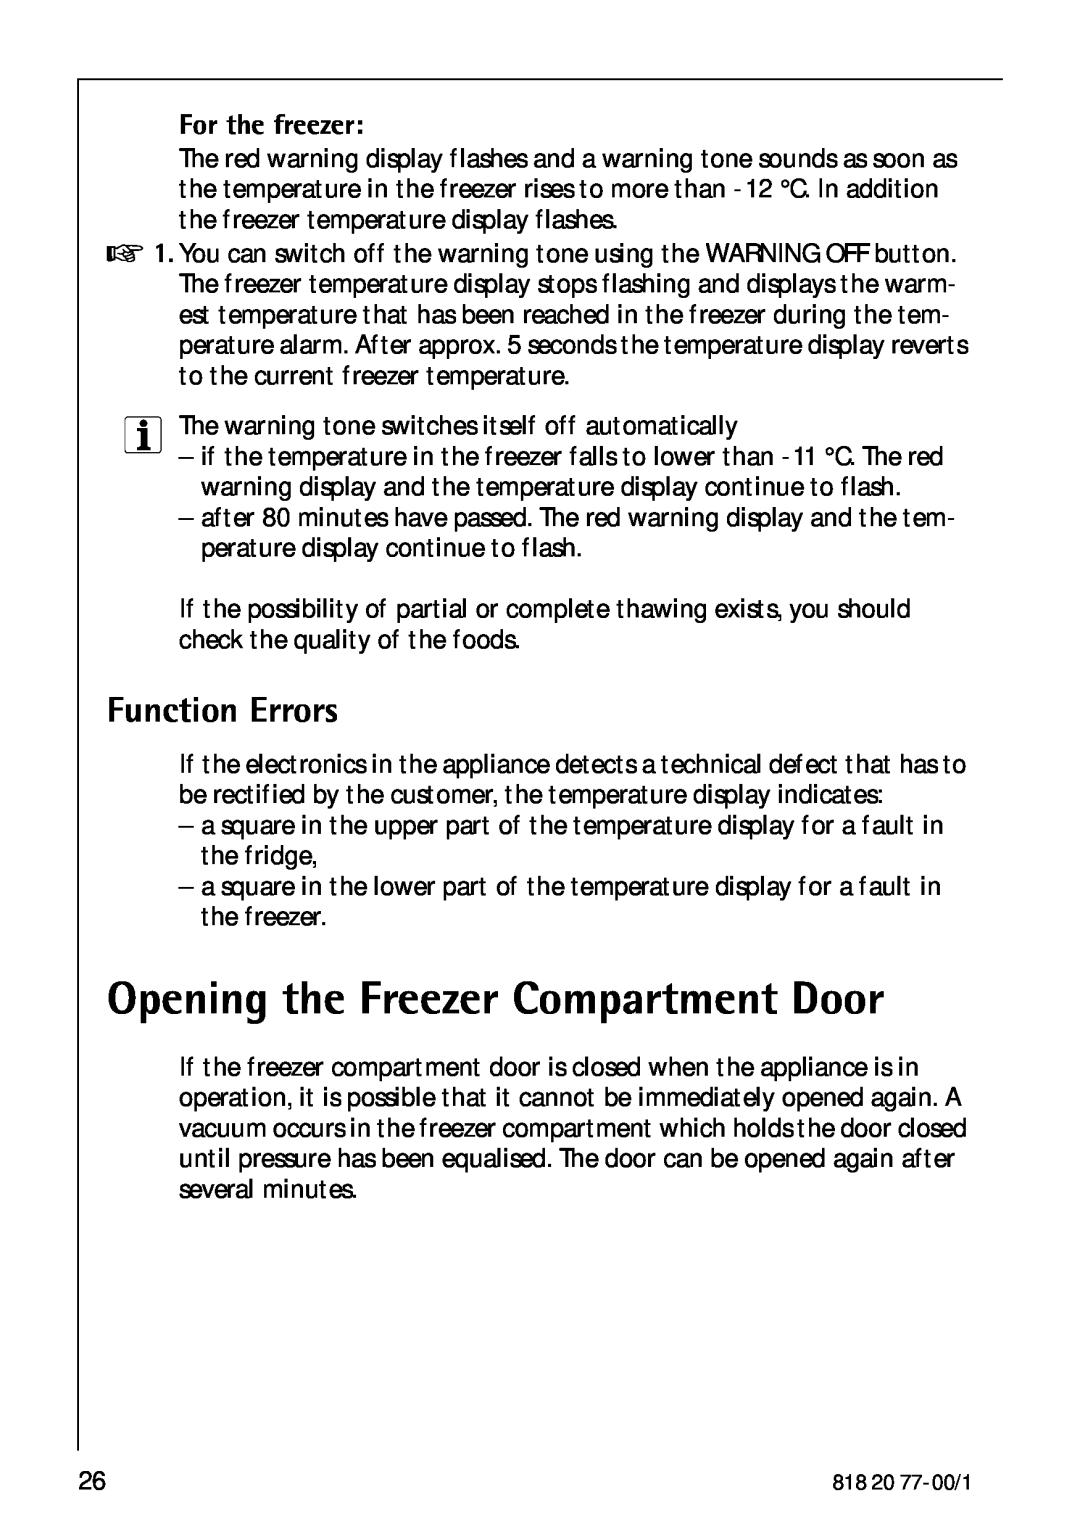 Electrolux 3985-7 KG manual Opening the Freezer Compartment Door, Function Errors, For the freezer 